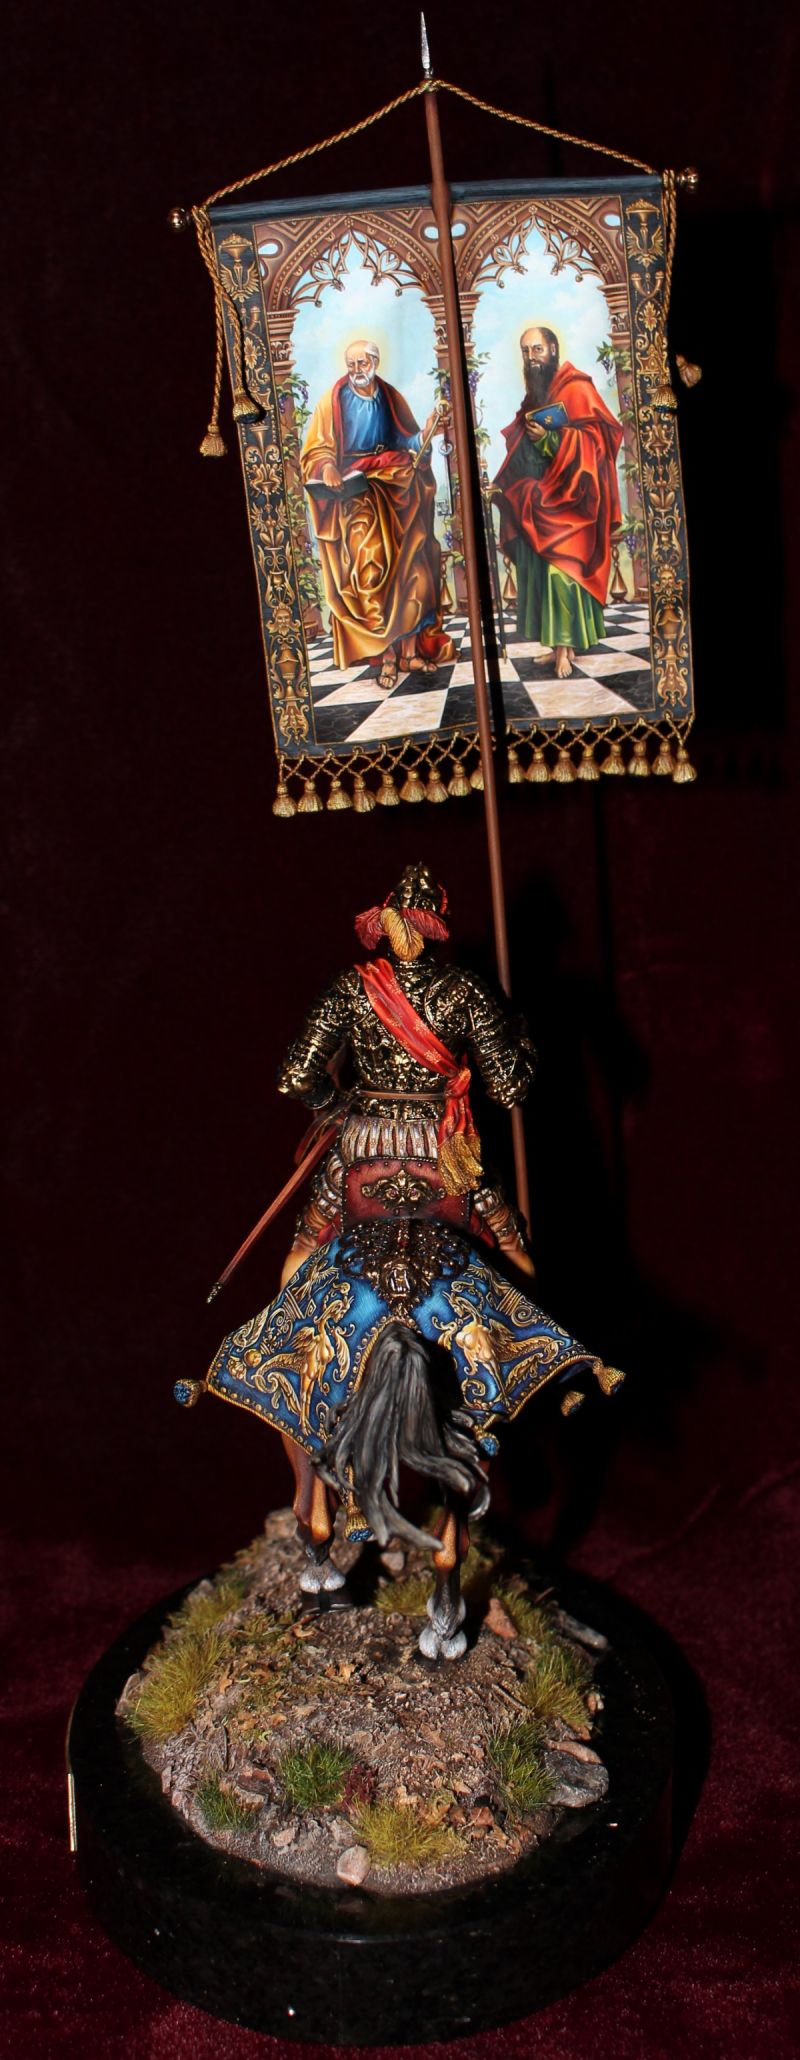 Knight in parade armor with banner